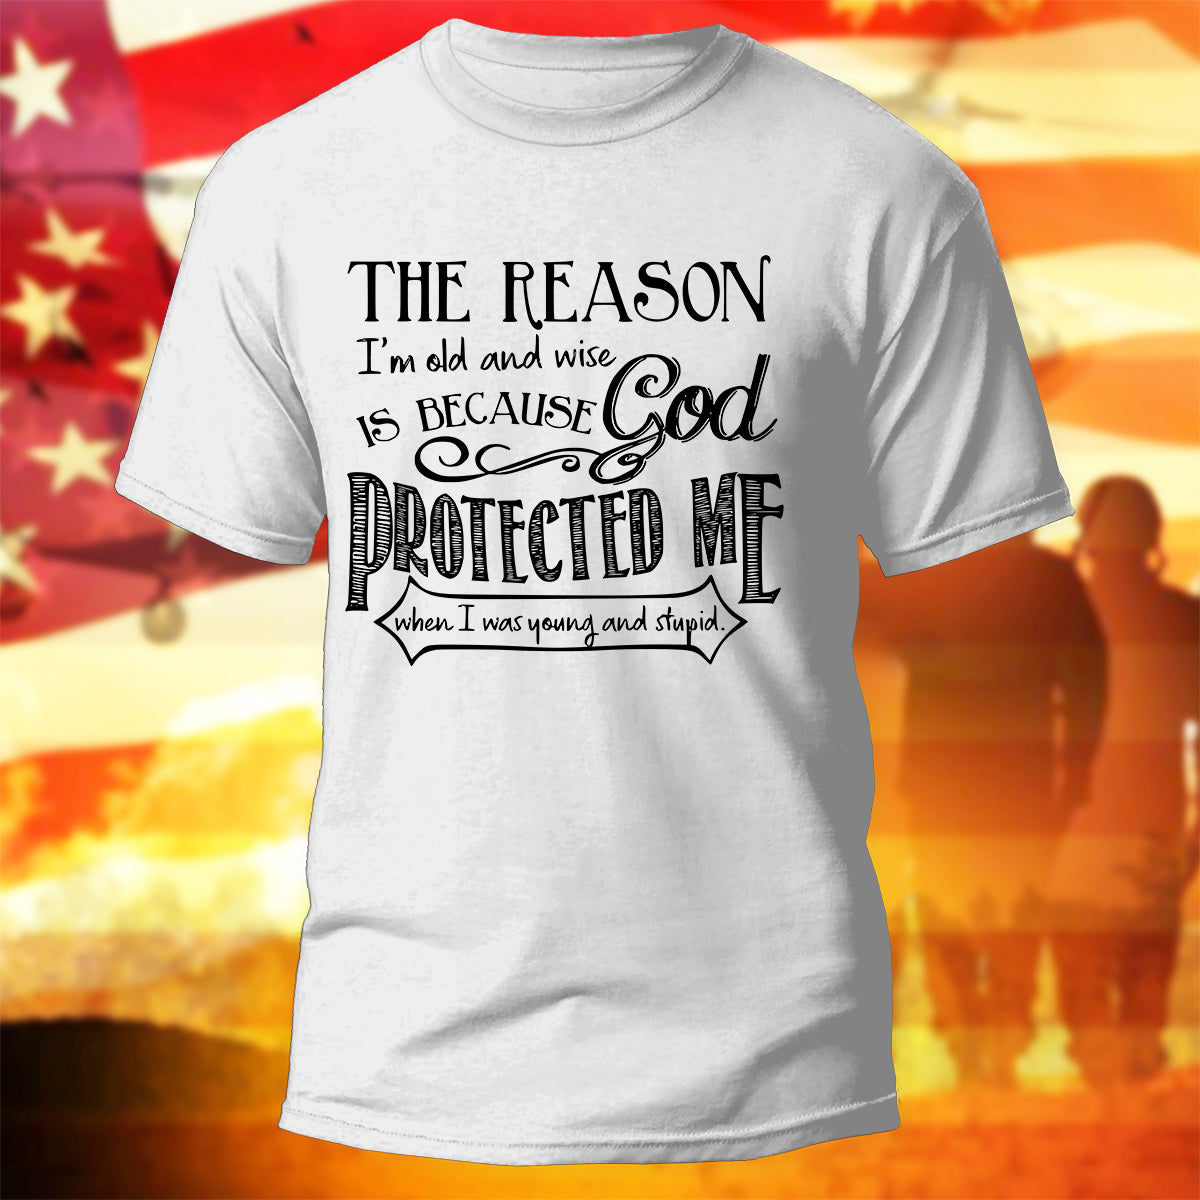 God Protected Me T-Shirt The Reason I'm Old And Wise Shirt Christian Gift